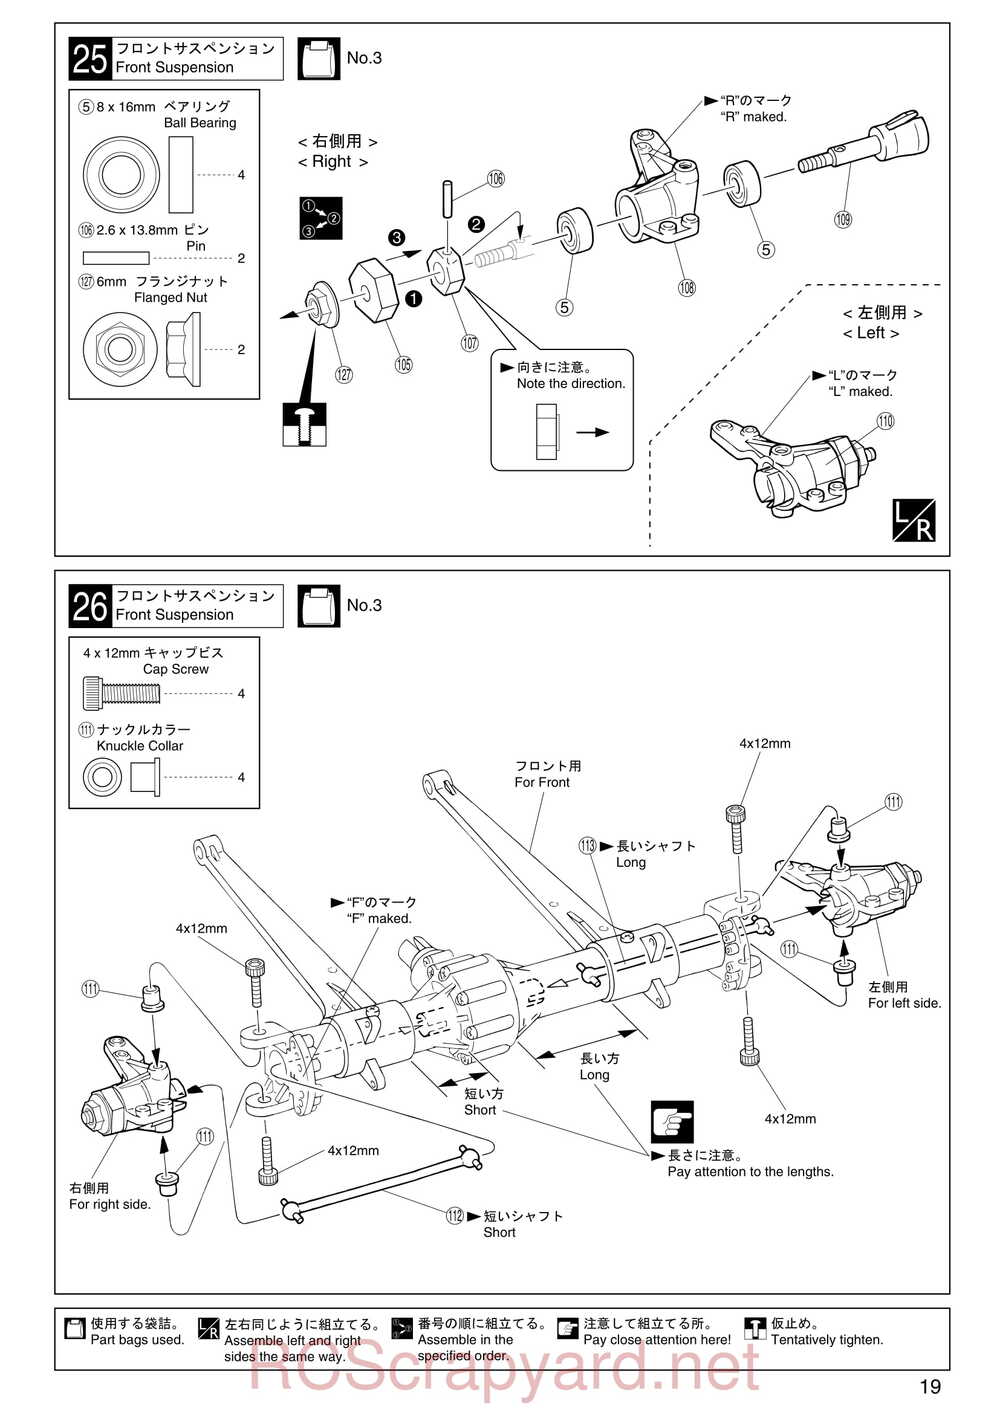 Kyosho - 30522b - Twin-Forcec-SP - Manual - Page 19